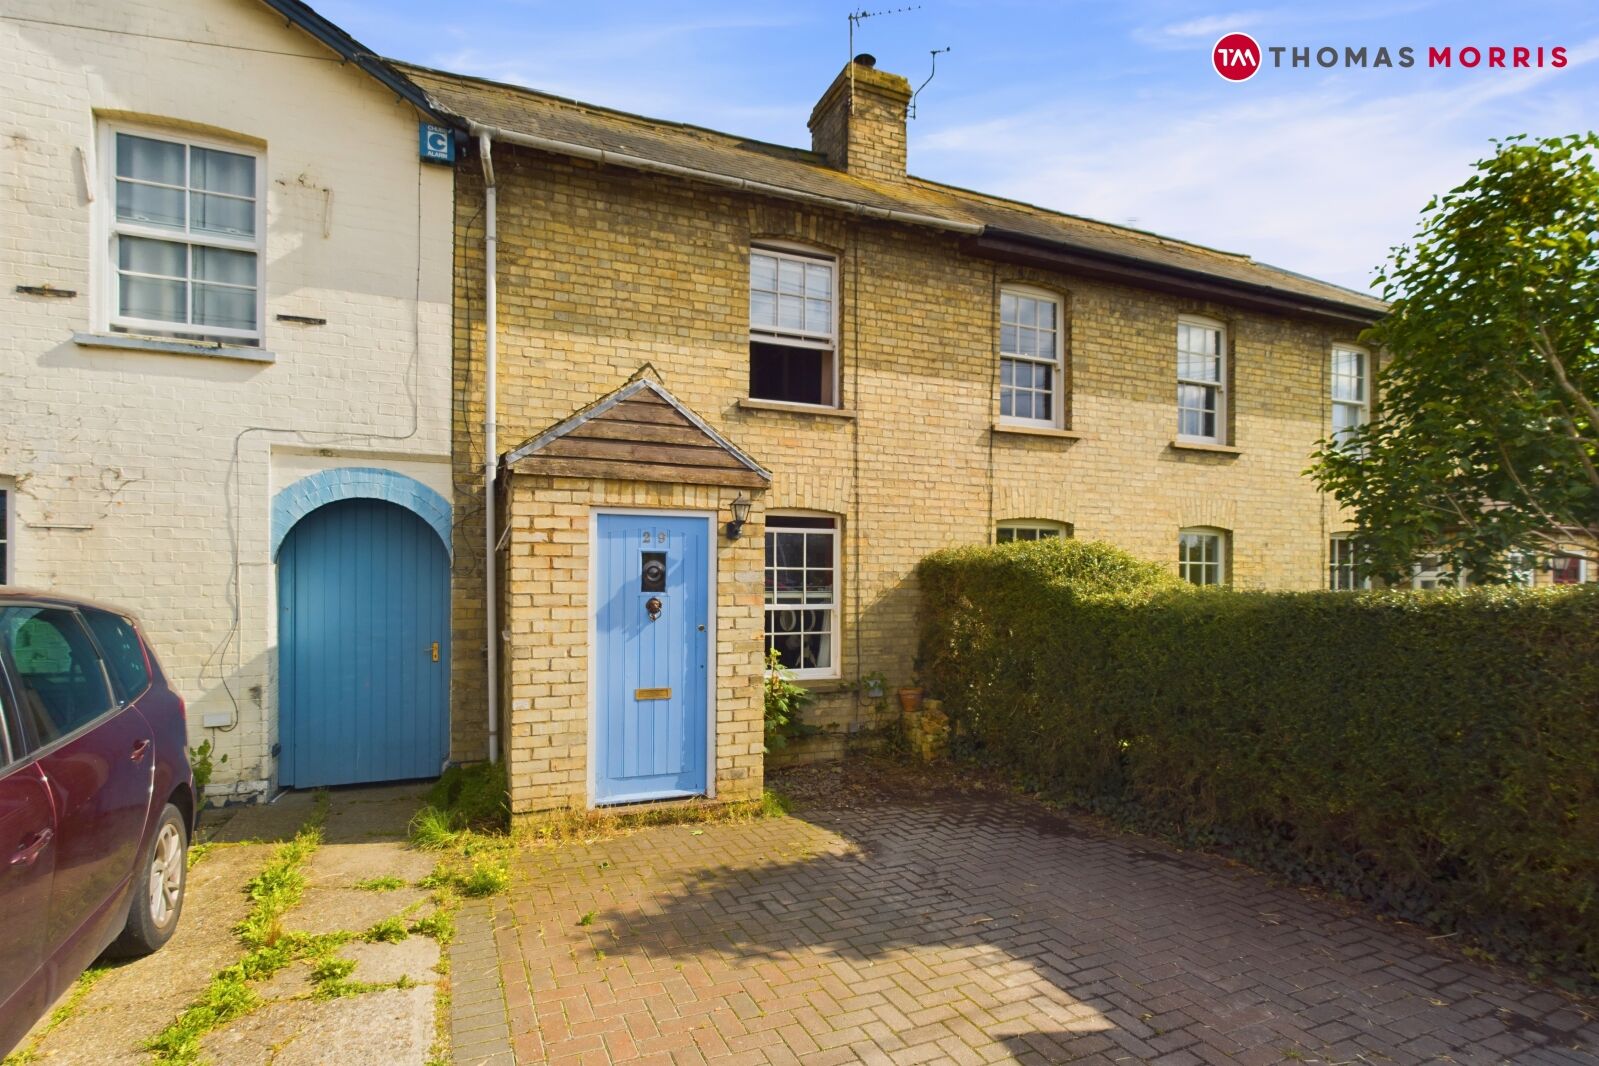 2 bedroom mid terraced house for sale Cambridge Road, Royston, SG8, main image